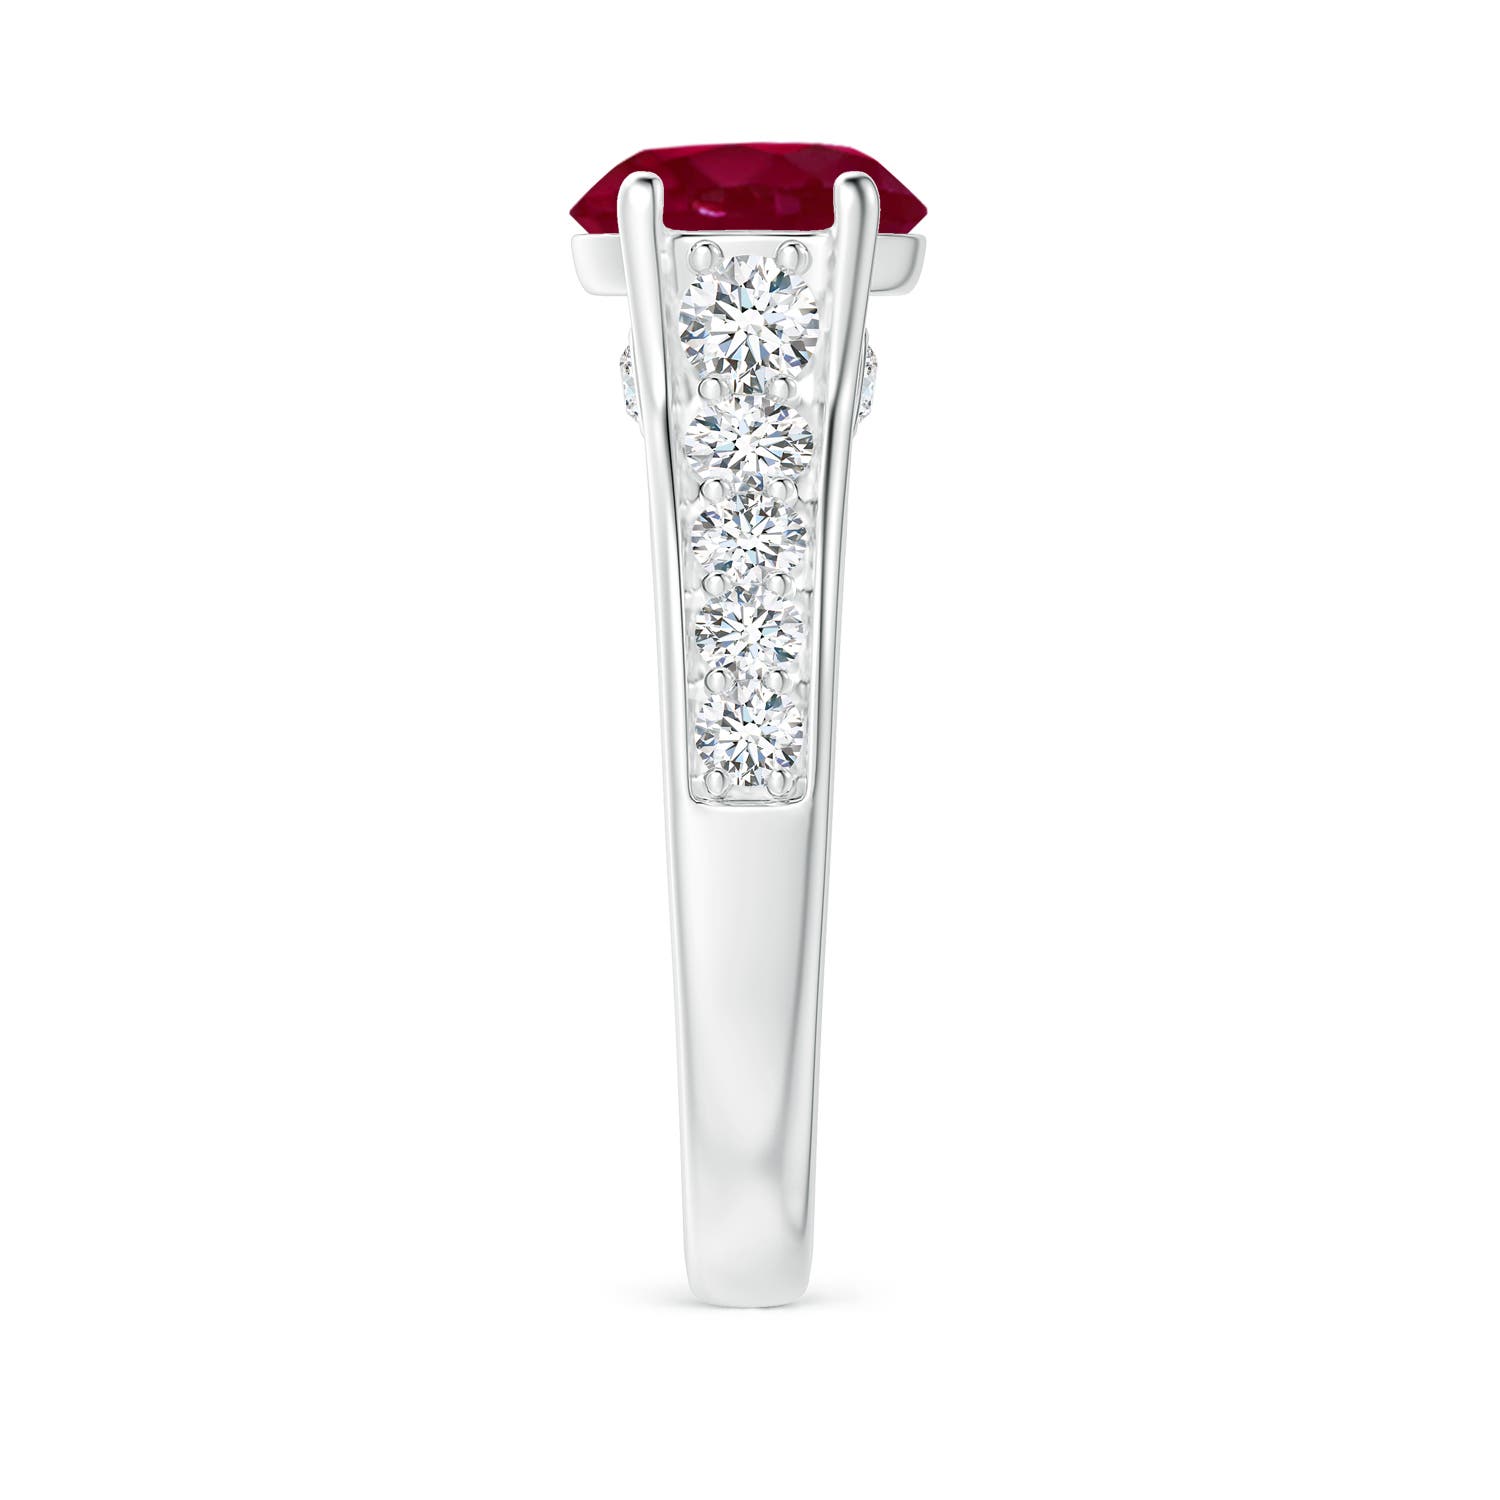 A - Ruby / 2.8 CT / 14 KT White Gold